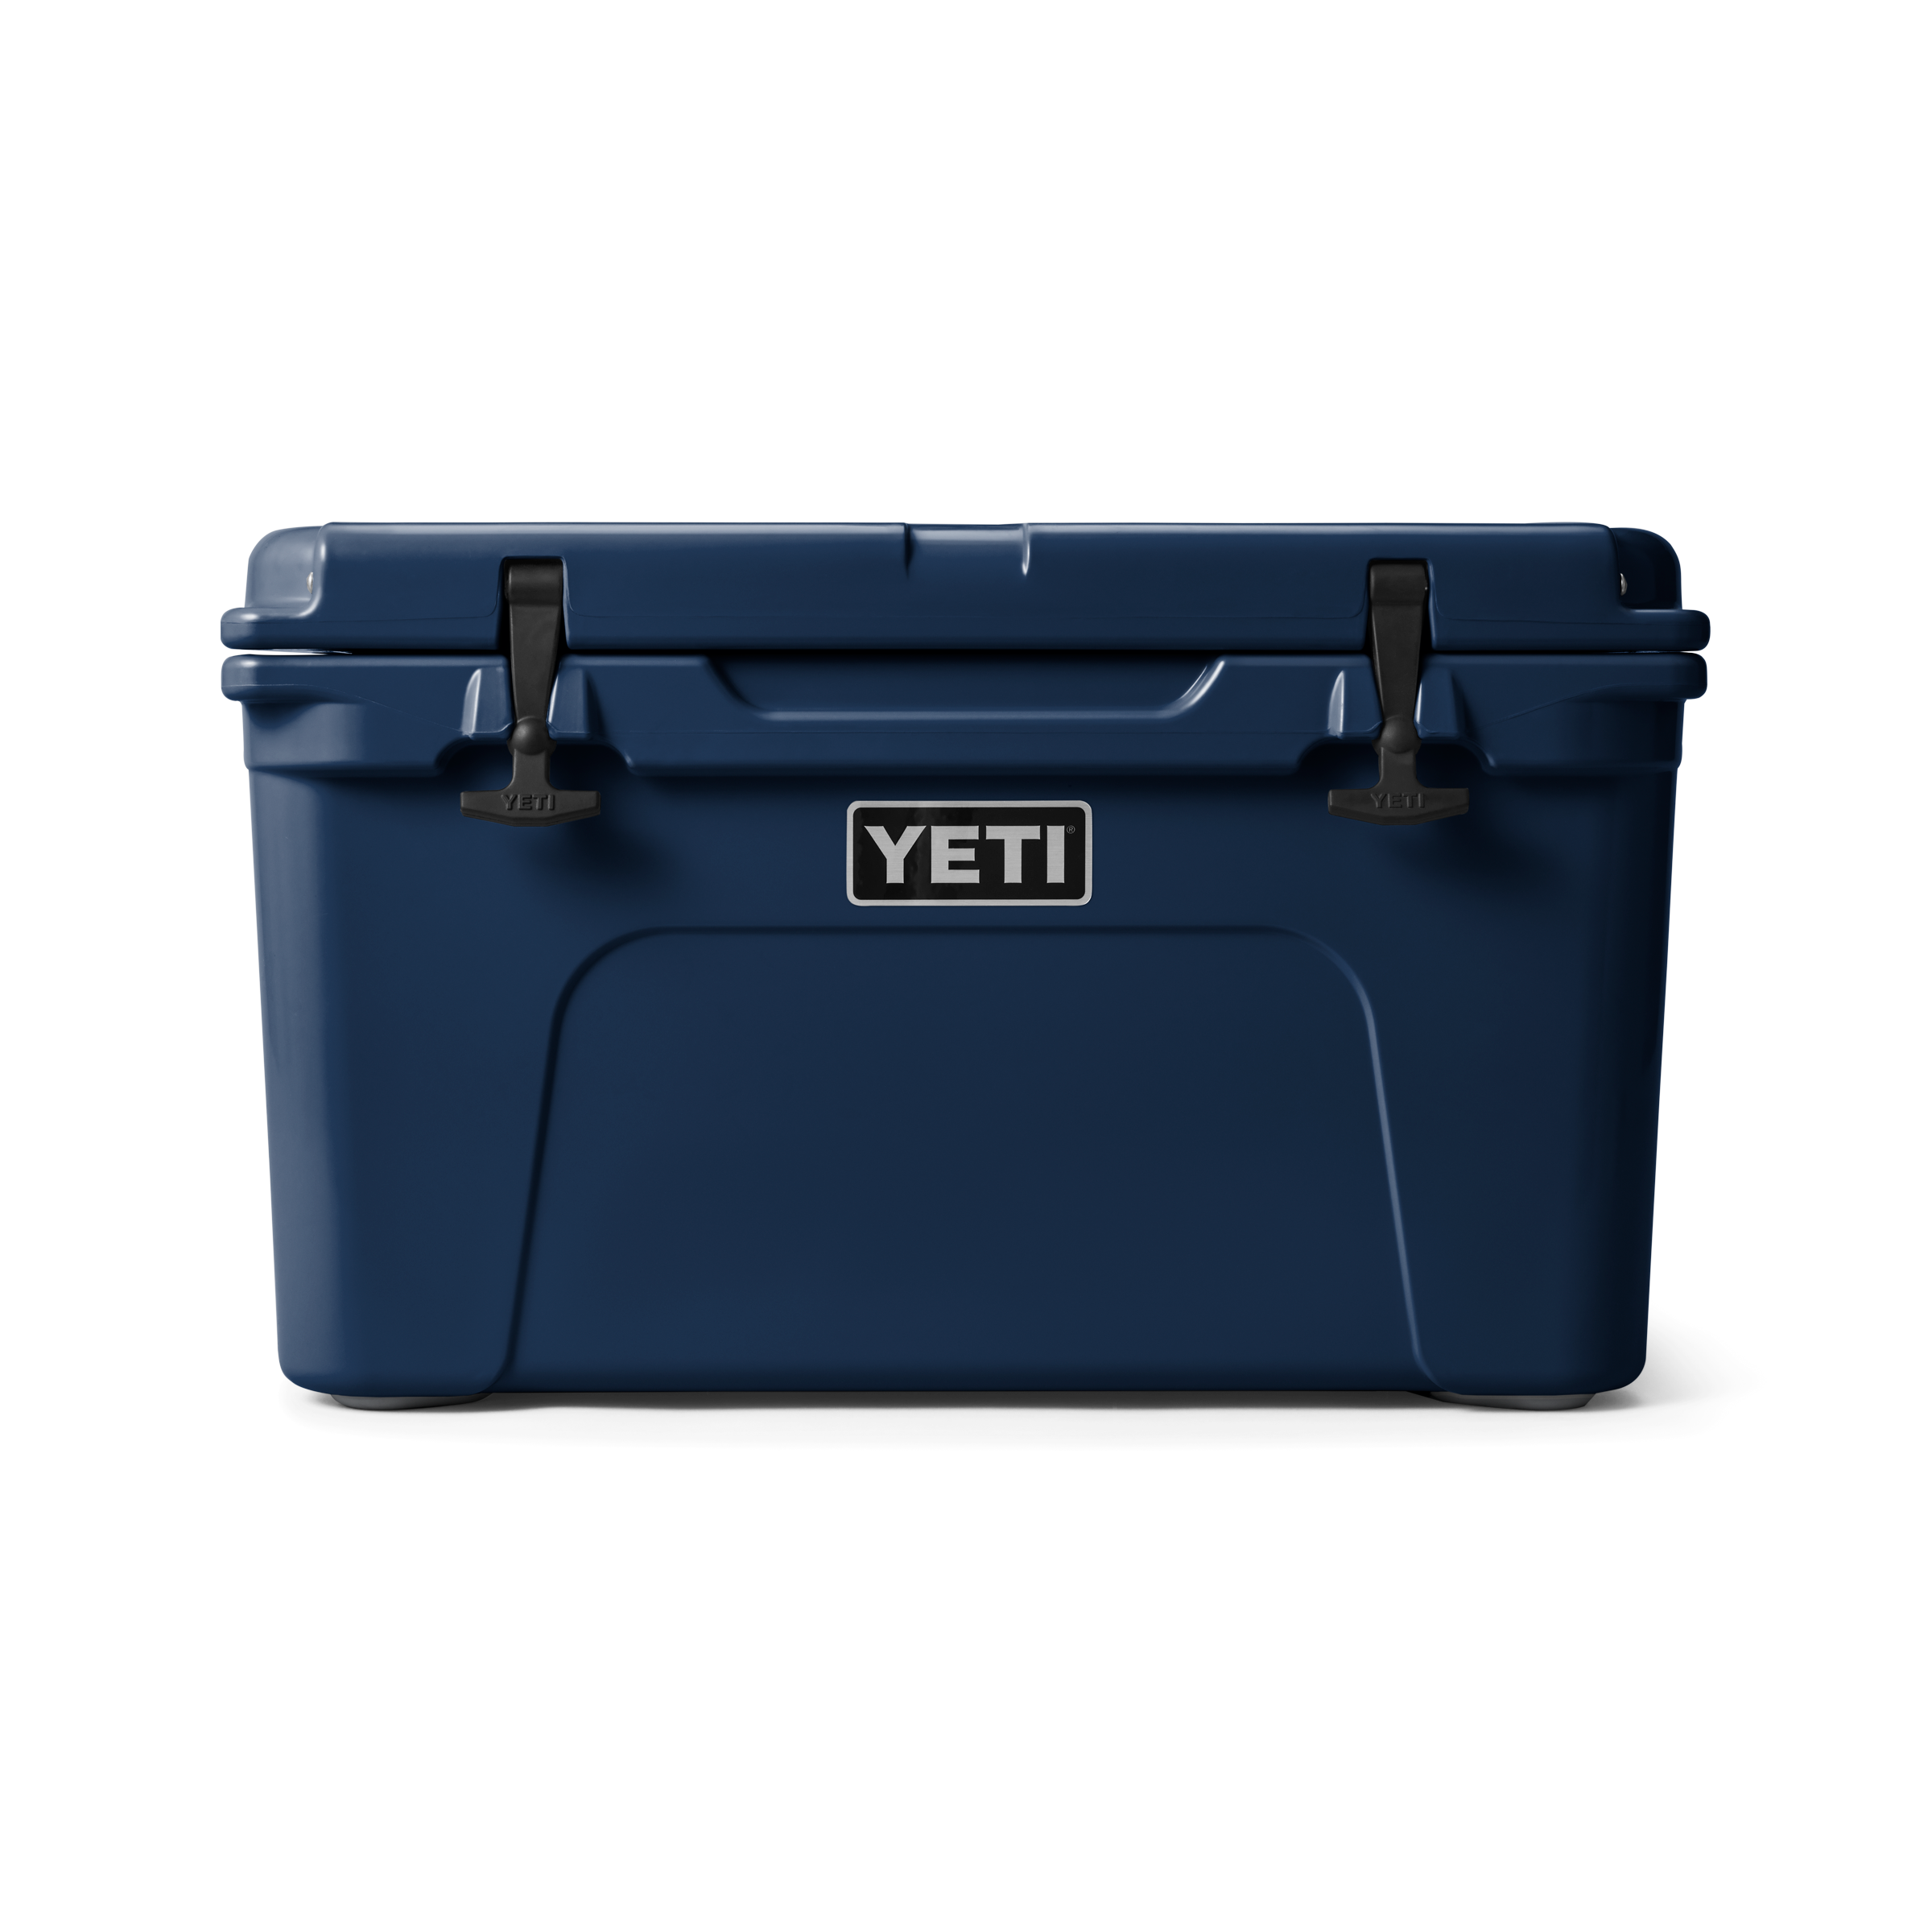 https://www.grillcenter.ch/images/product_images/original_images/1_Yeti%20Tundra%2045%20K%C3%BChlbox%20Hardcooler_Navy.png